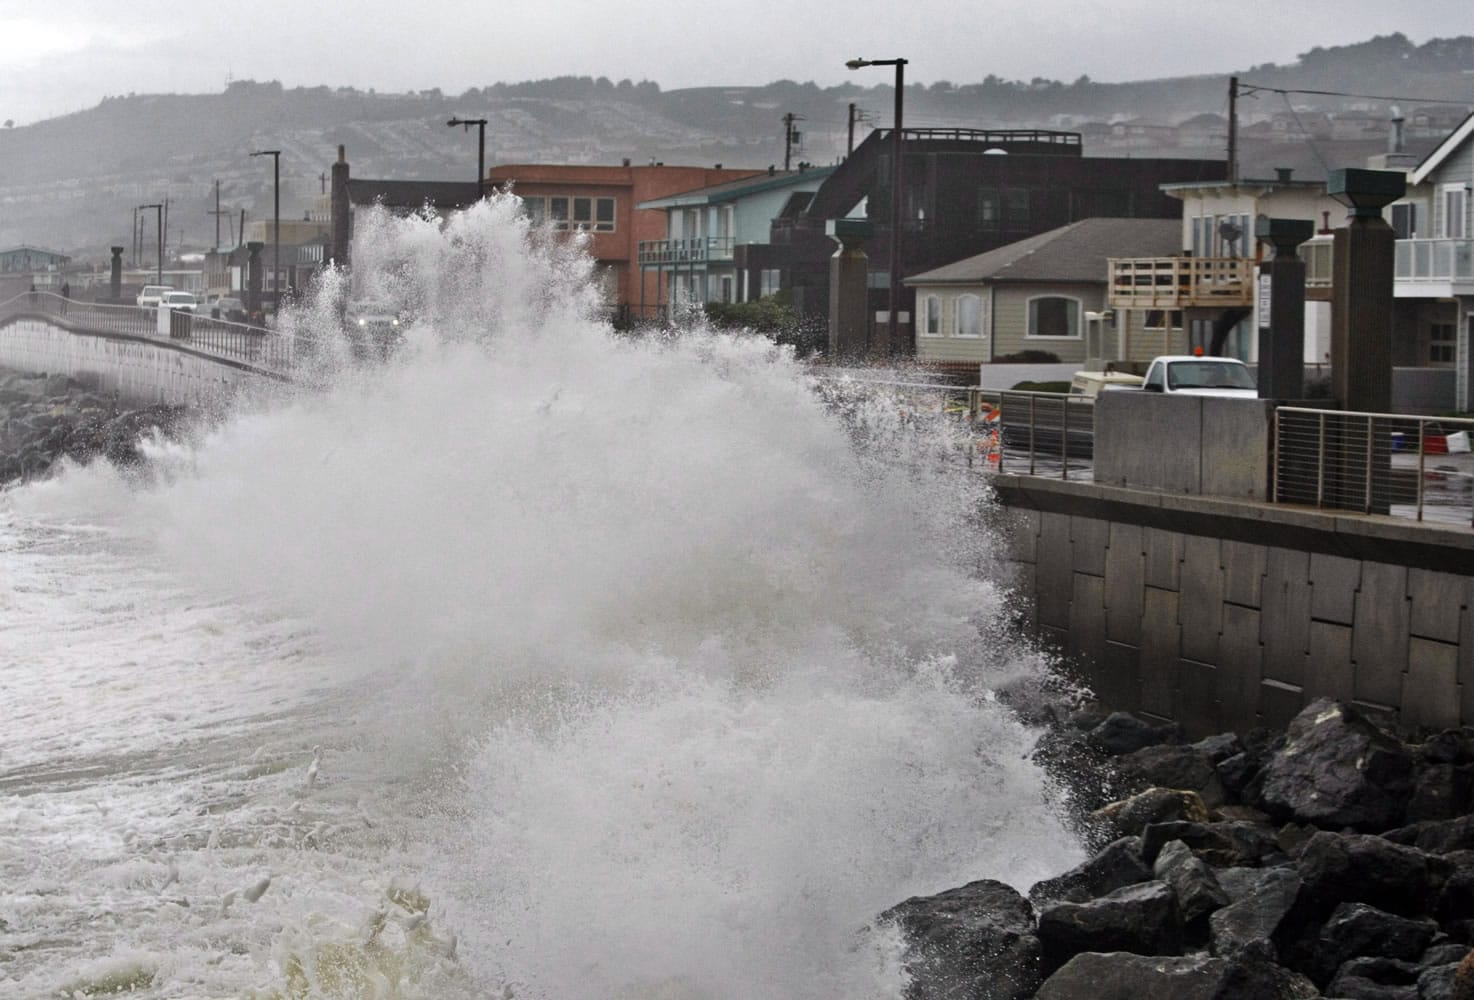 Waves pound a wall near buildings in Pacifica, Calif., during a rain storm in 2010.